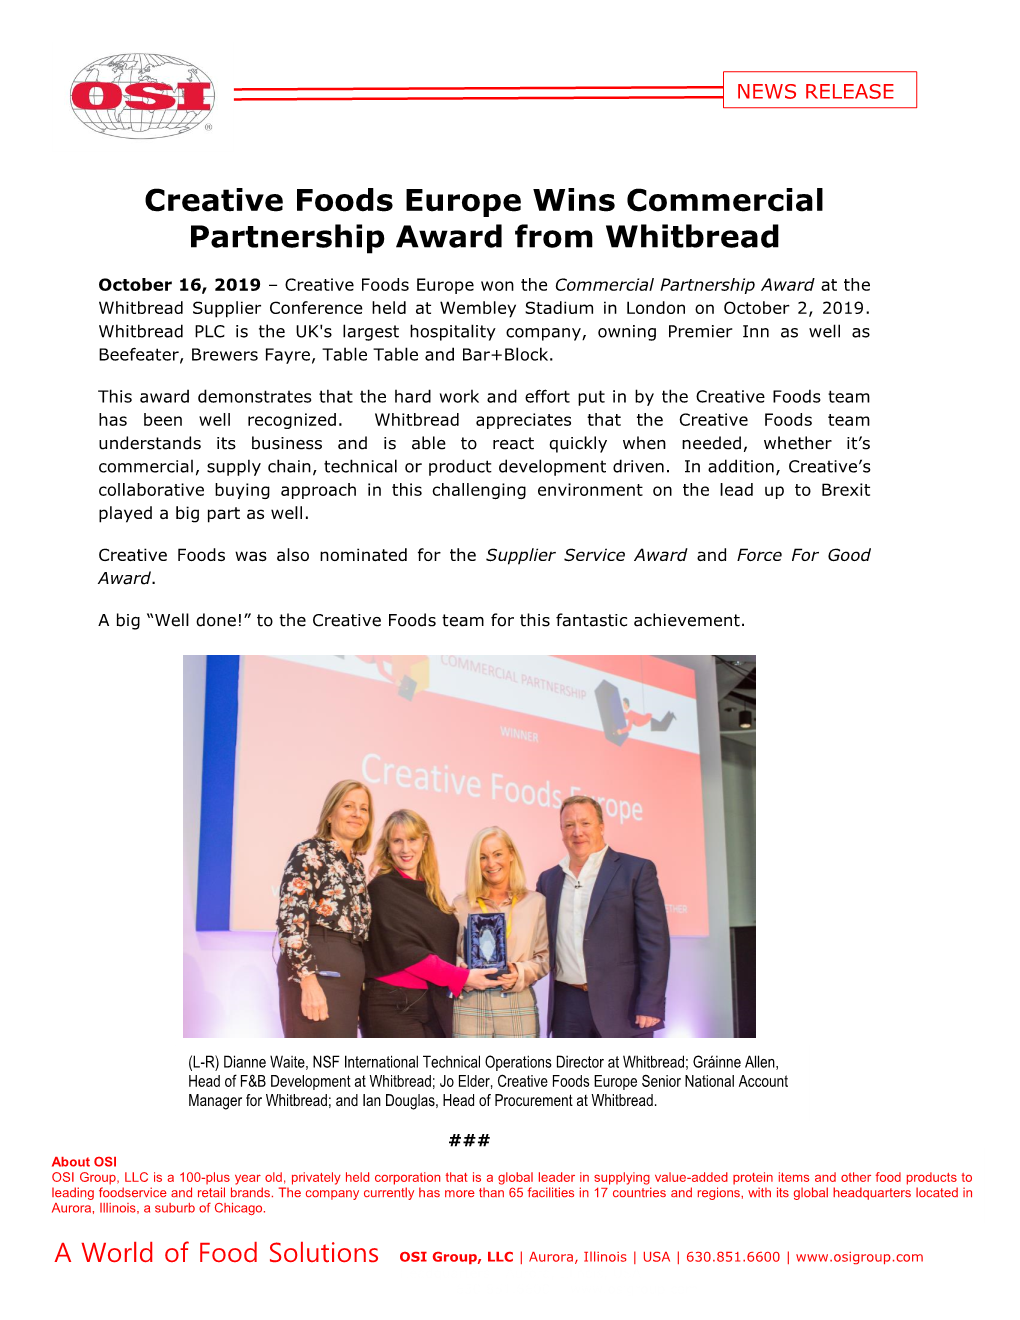 Creative Foods Europe Wins Commercial Partnership Award from Whitbread